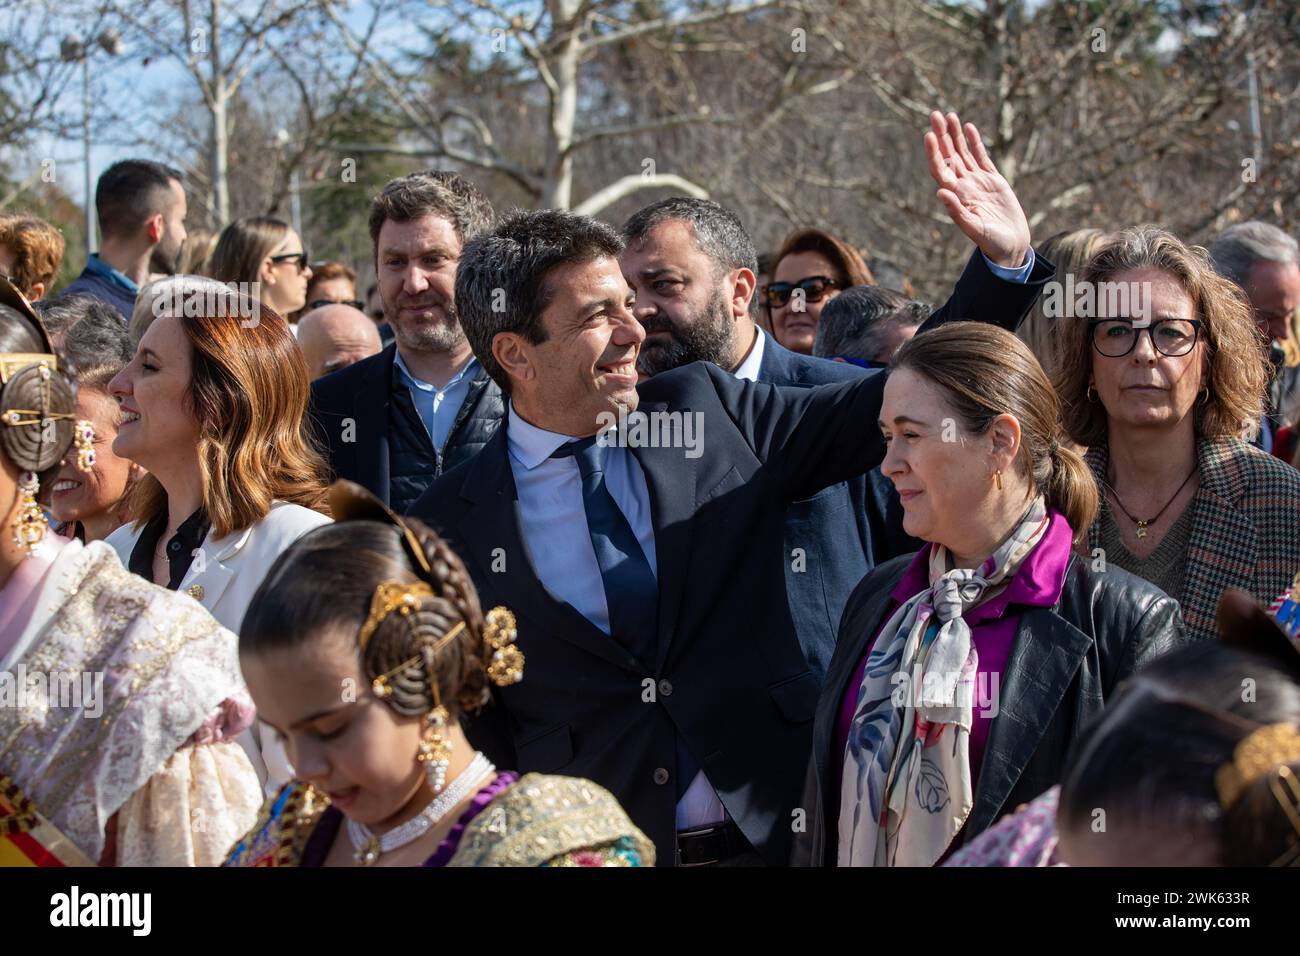 The president of the Valencian Generalitat, Carlos Mazón greets those present during the mascleta. Madrid has held a Mascleta at the Madrid Río Park area where more than 300 kilos of explosives have been detonated.Previously at the Cibeles Palace, headquarters of the Madrid city council, an official event was held to welcome the Valencian delegation with the participation of the mayor of Madrid, Jose Luis Martínez - Almeida; the president of the Valencian Generalitat, Carlos Mazón and the mayor of Valencia, María José Catalá and hundreds of 'falleras' with their typical costumes. (Photo by Dav Stock Photo